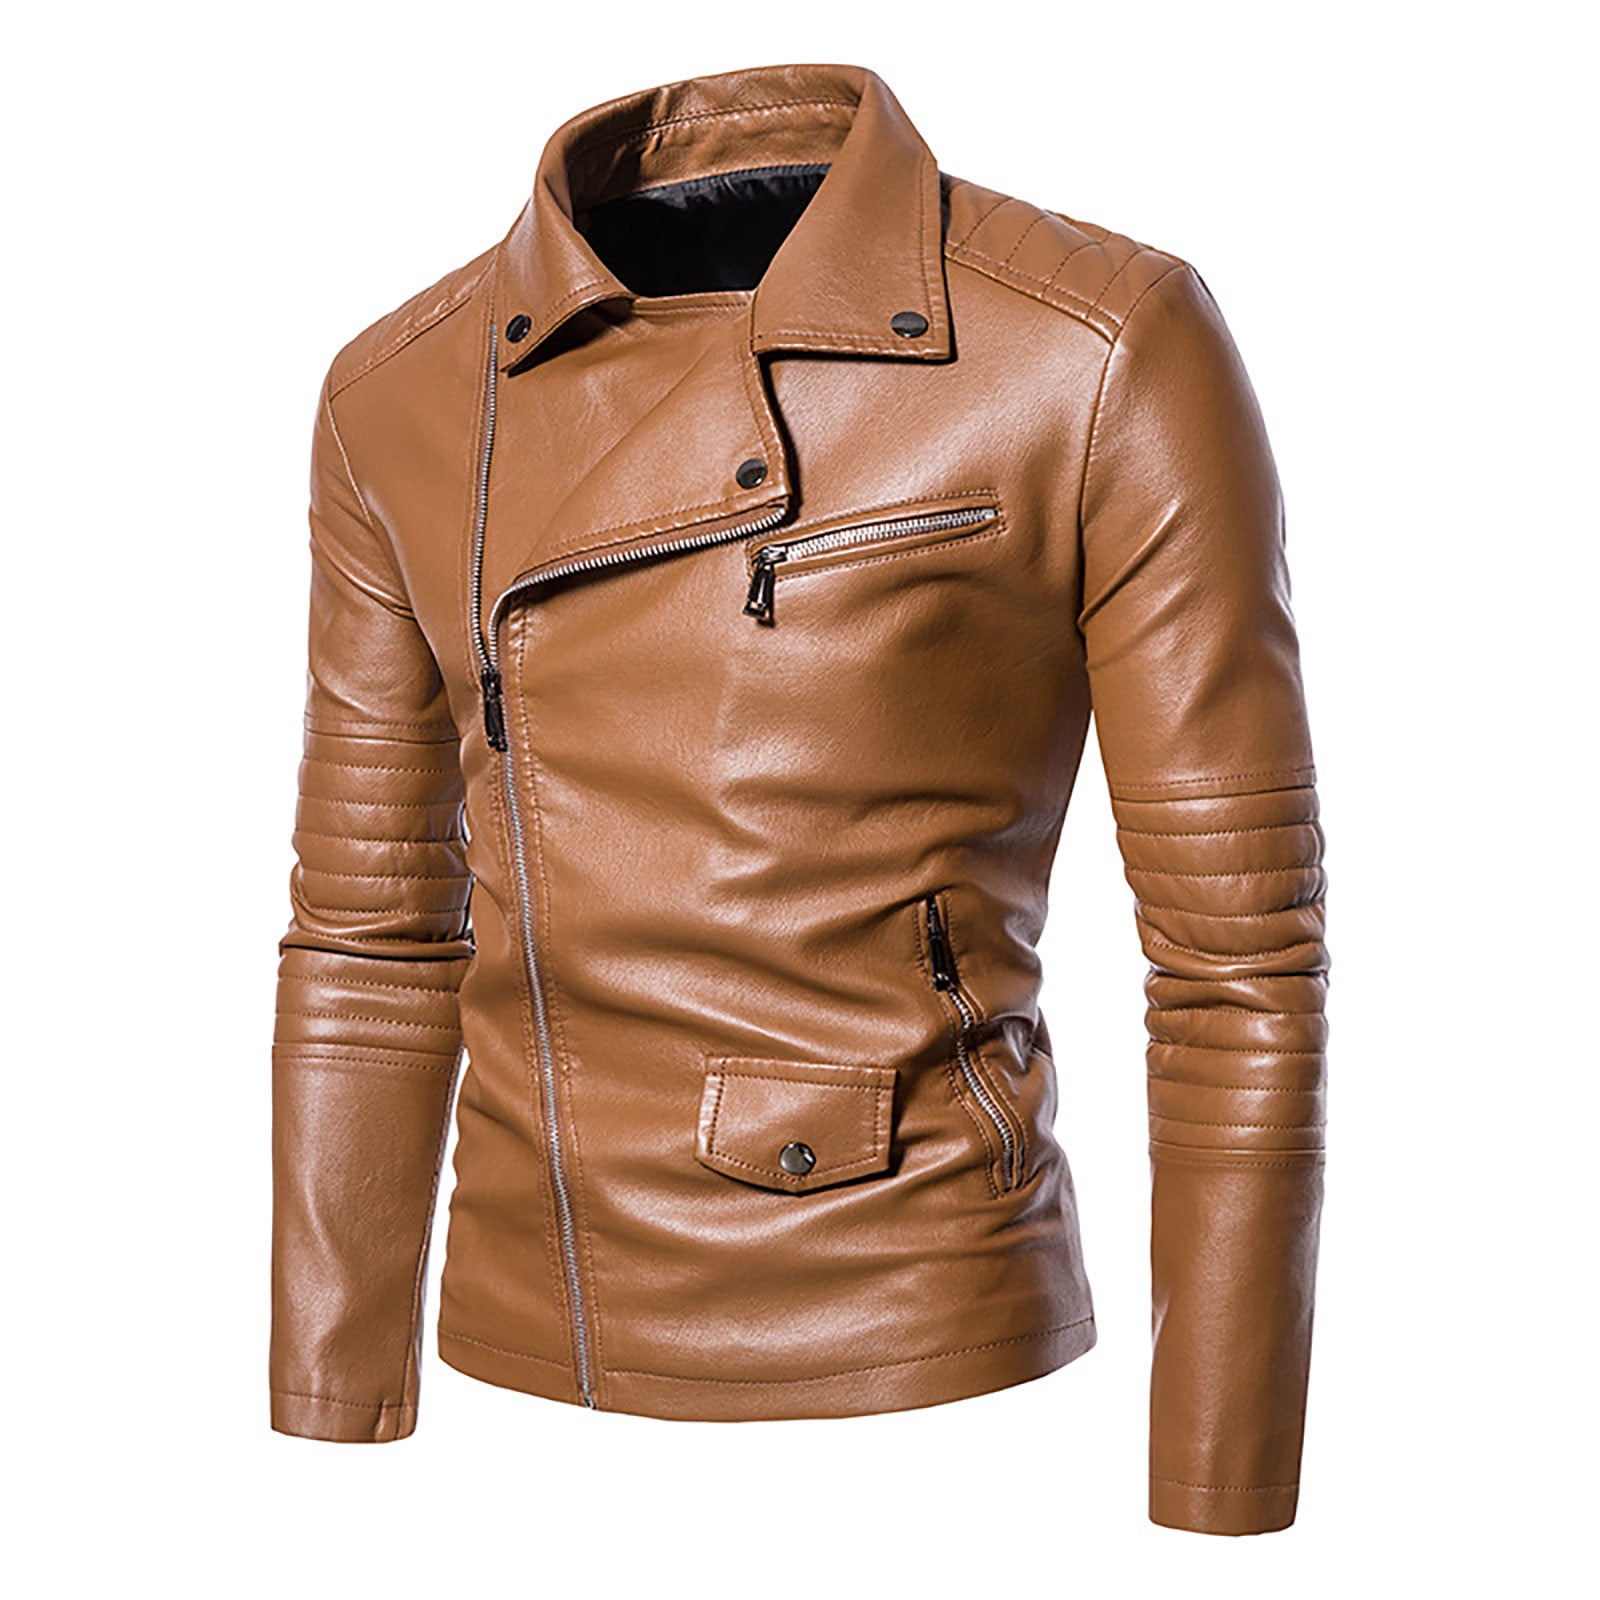 Reduced Price Womens Clothing ! BVnarty Discount Jackets for Men Solid Color Lapel Leather Motorcycle Jacket Warm Outwear Coat Fashion Casual Long